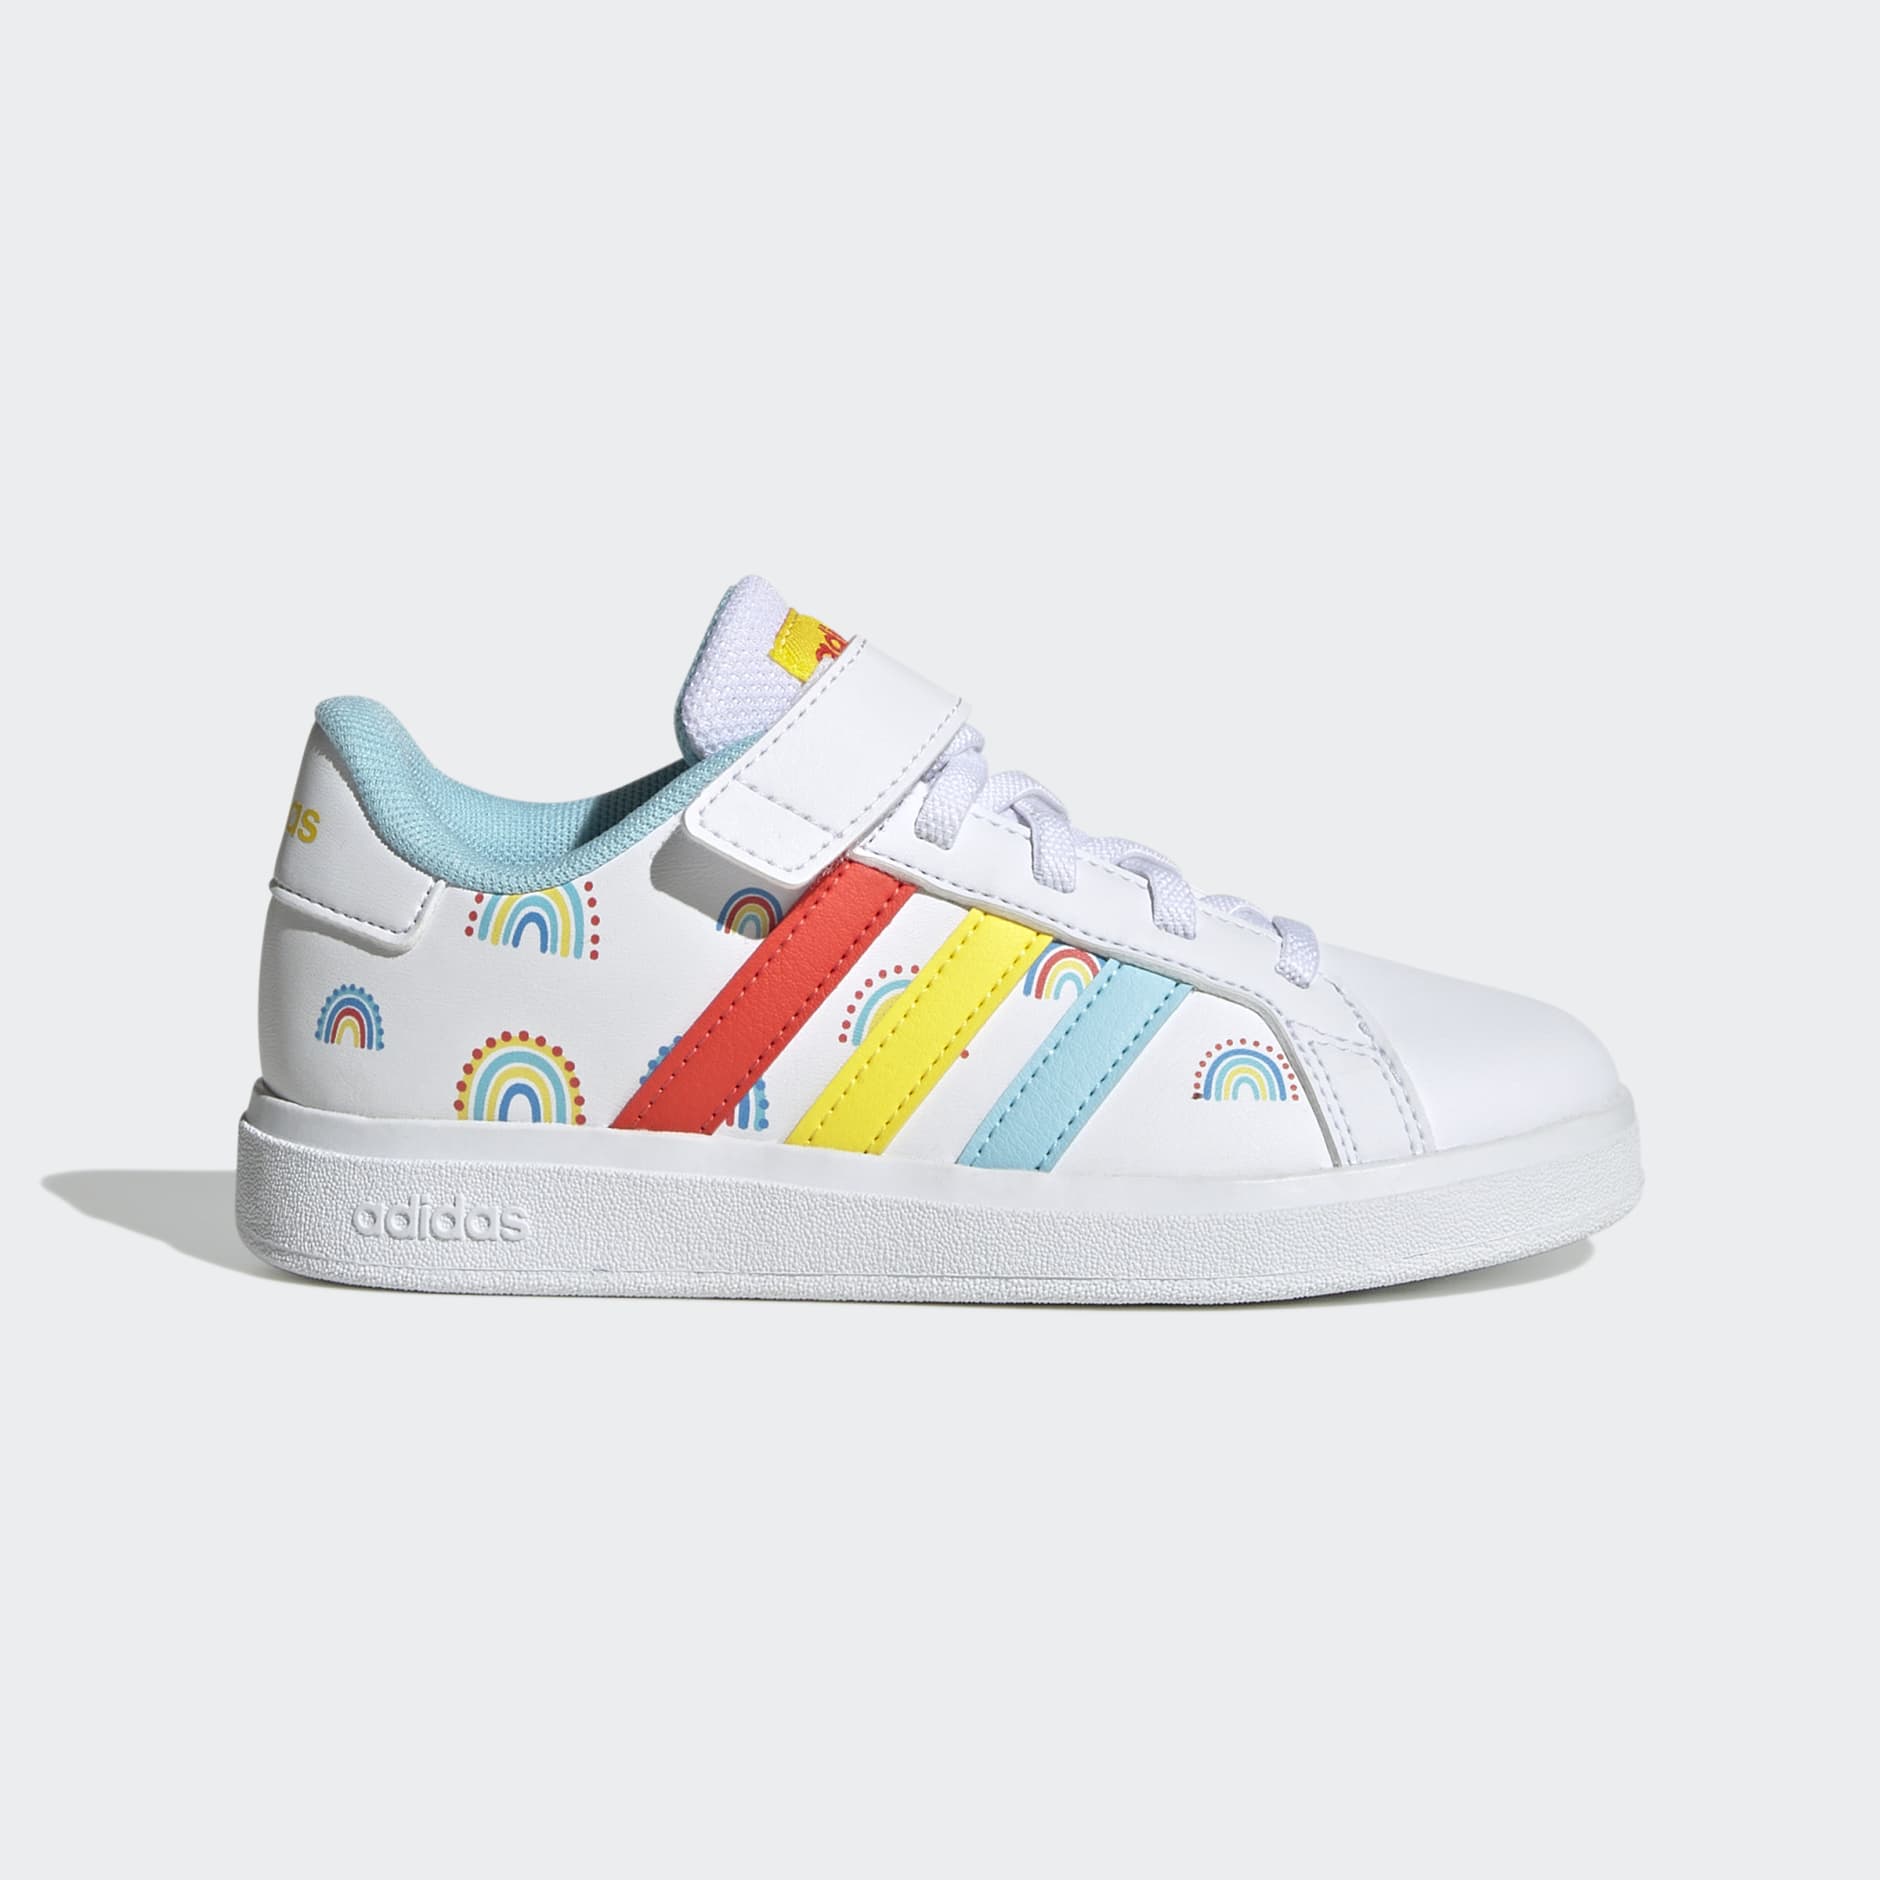 Brighten Up Your Day with Adidas Rainbow Shoes